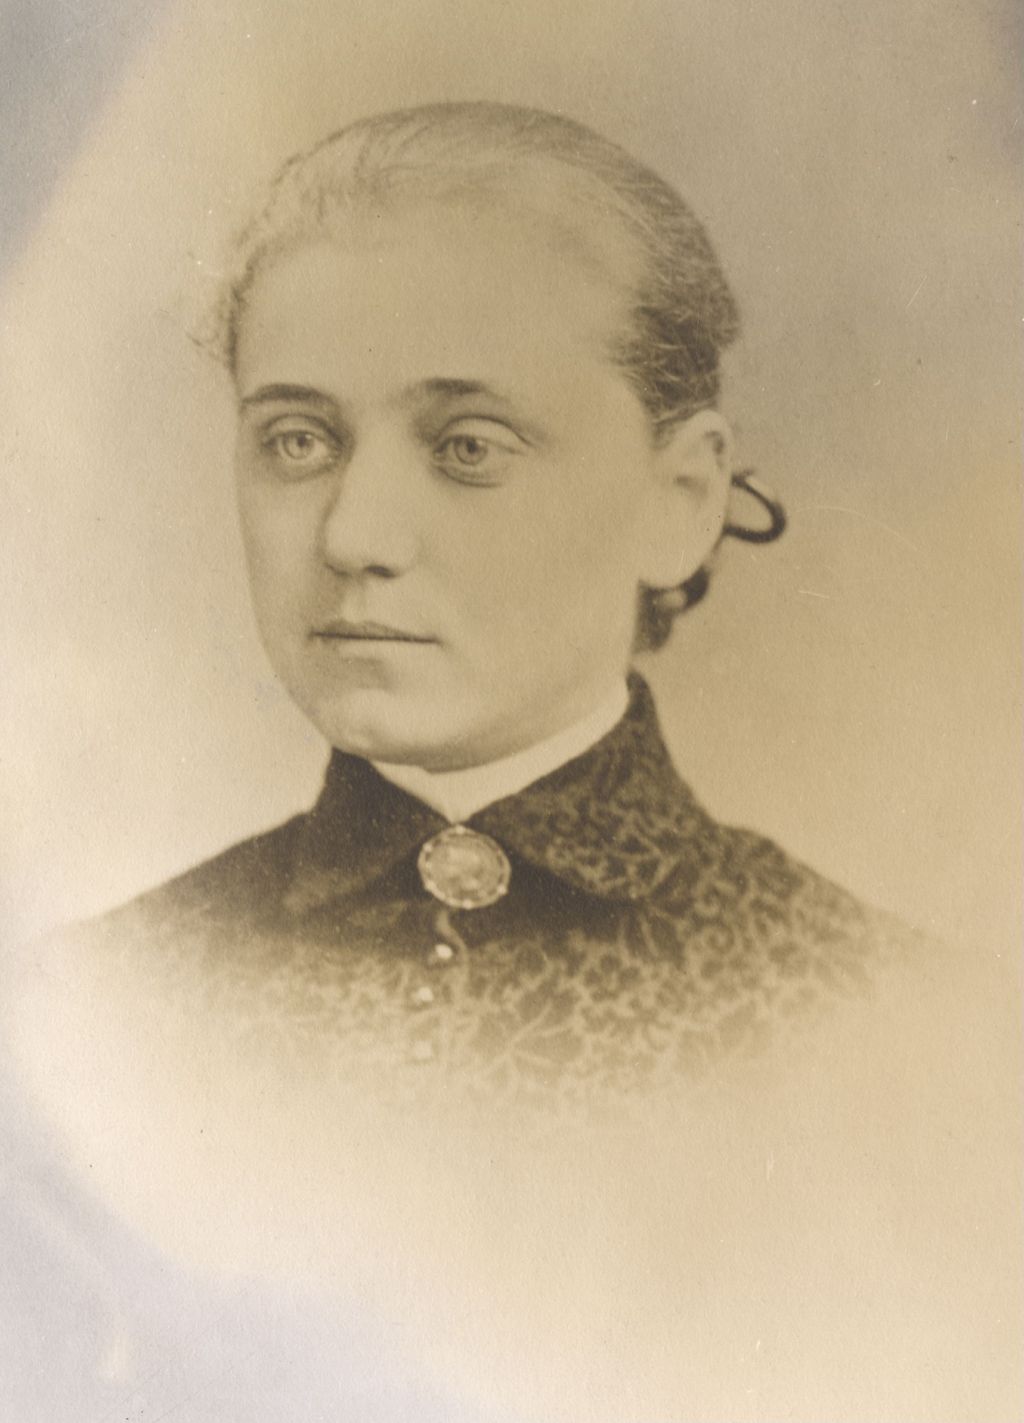 Portrait of Jane Addams at the time of her graduation from Rockford Female Seminary